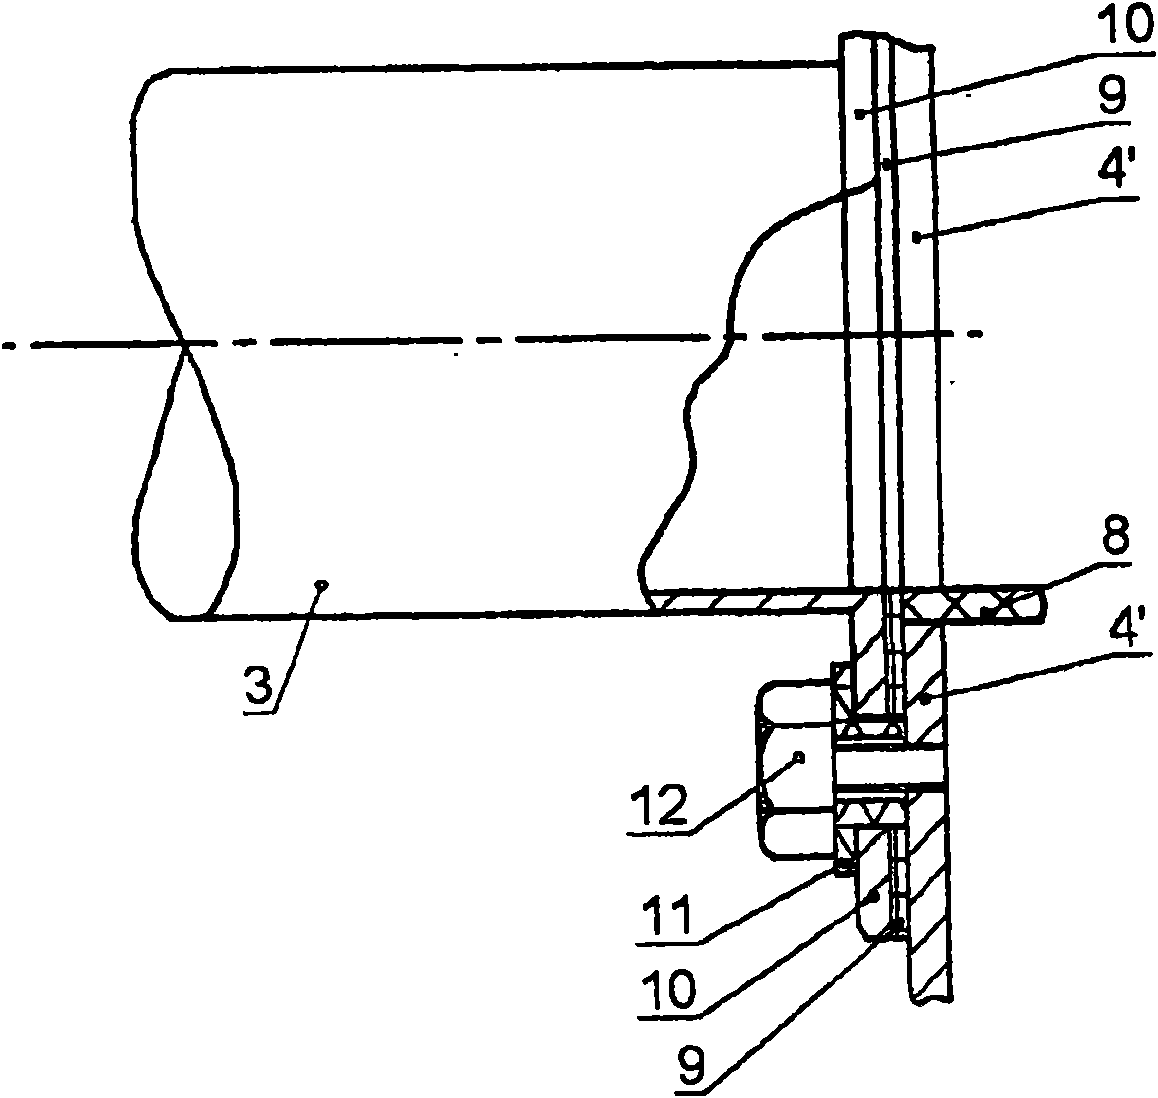 Receiving device for determining foreign parts